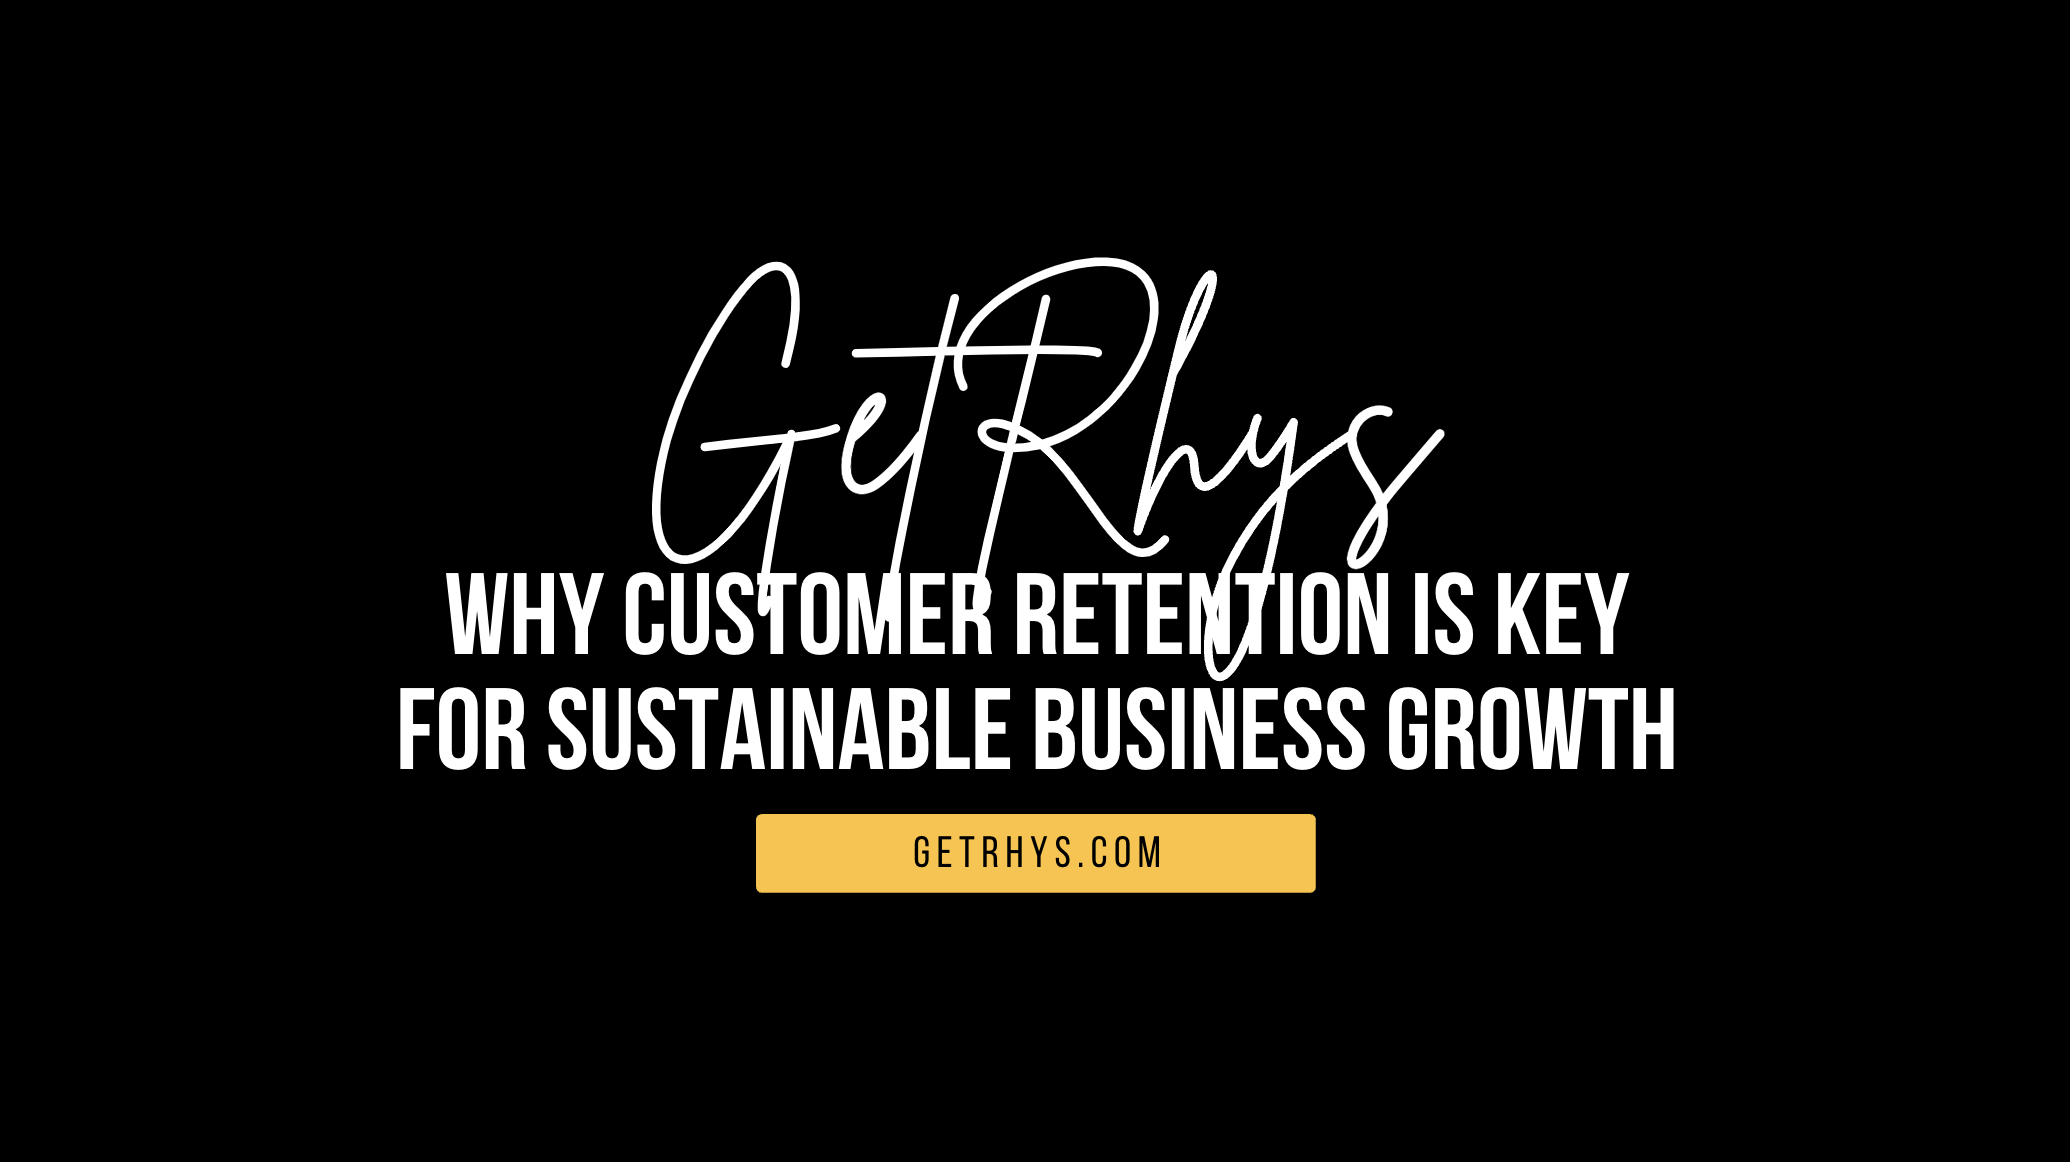 Why customer retention is key for sustainable business growth